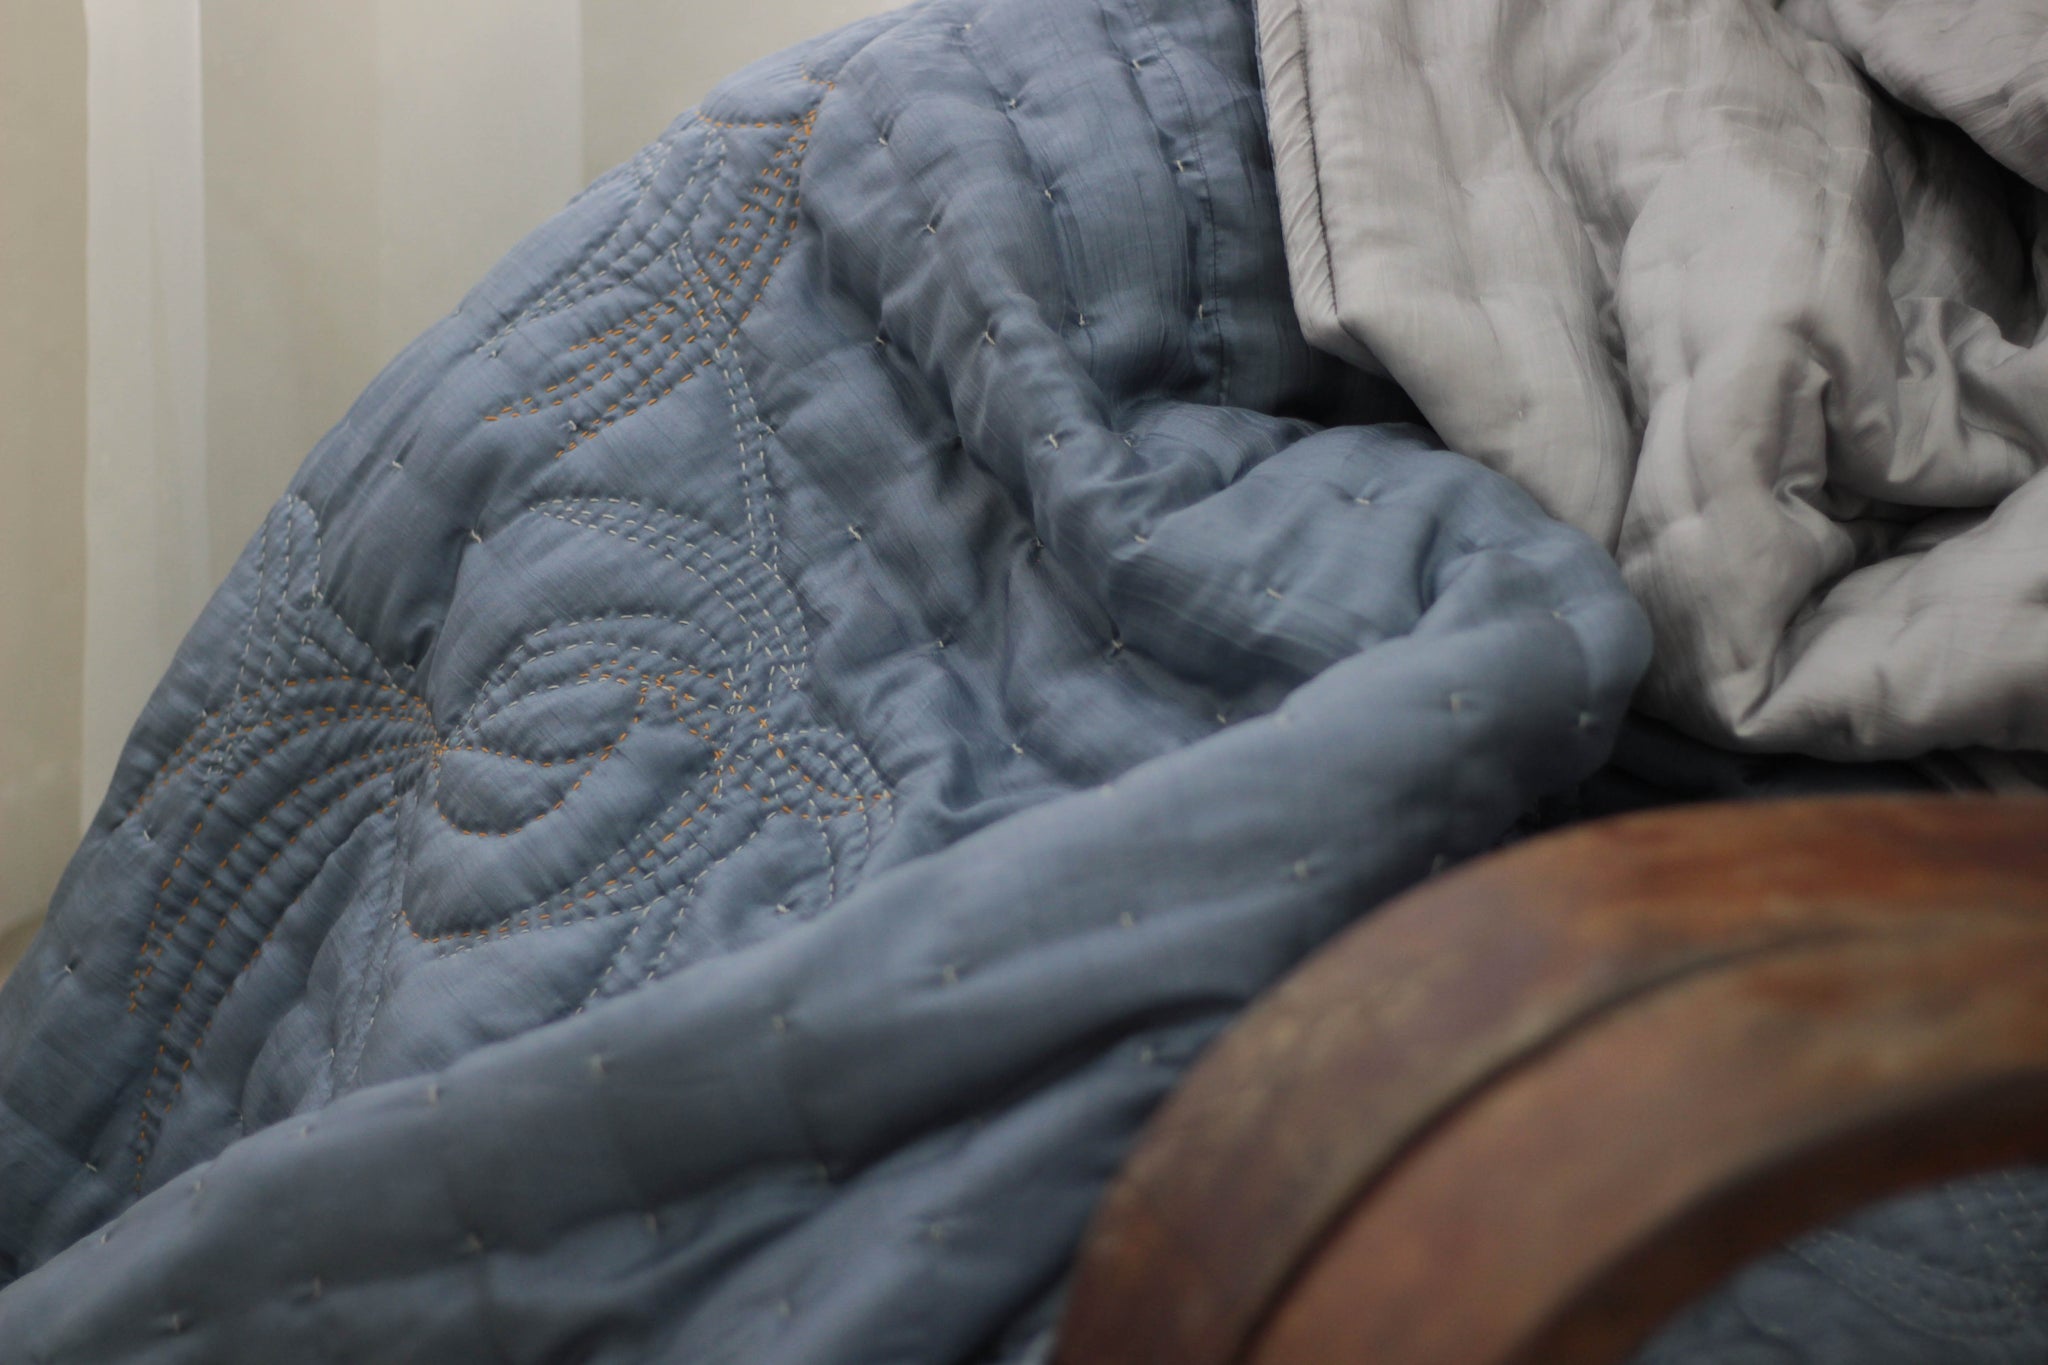 Mulberry Silk Bed Set - Quilt & Shams - The Thorn Bird Hand Embroidery